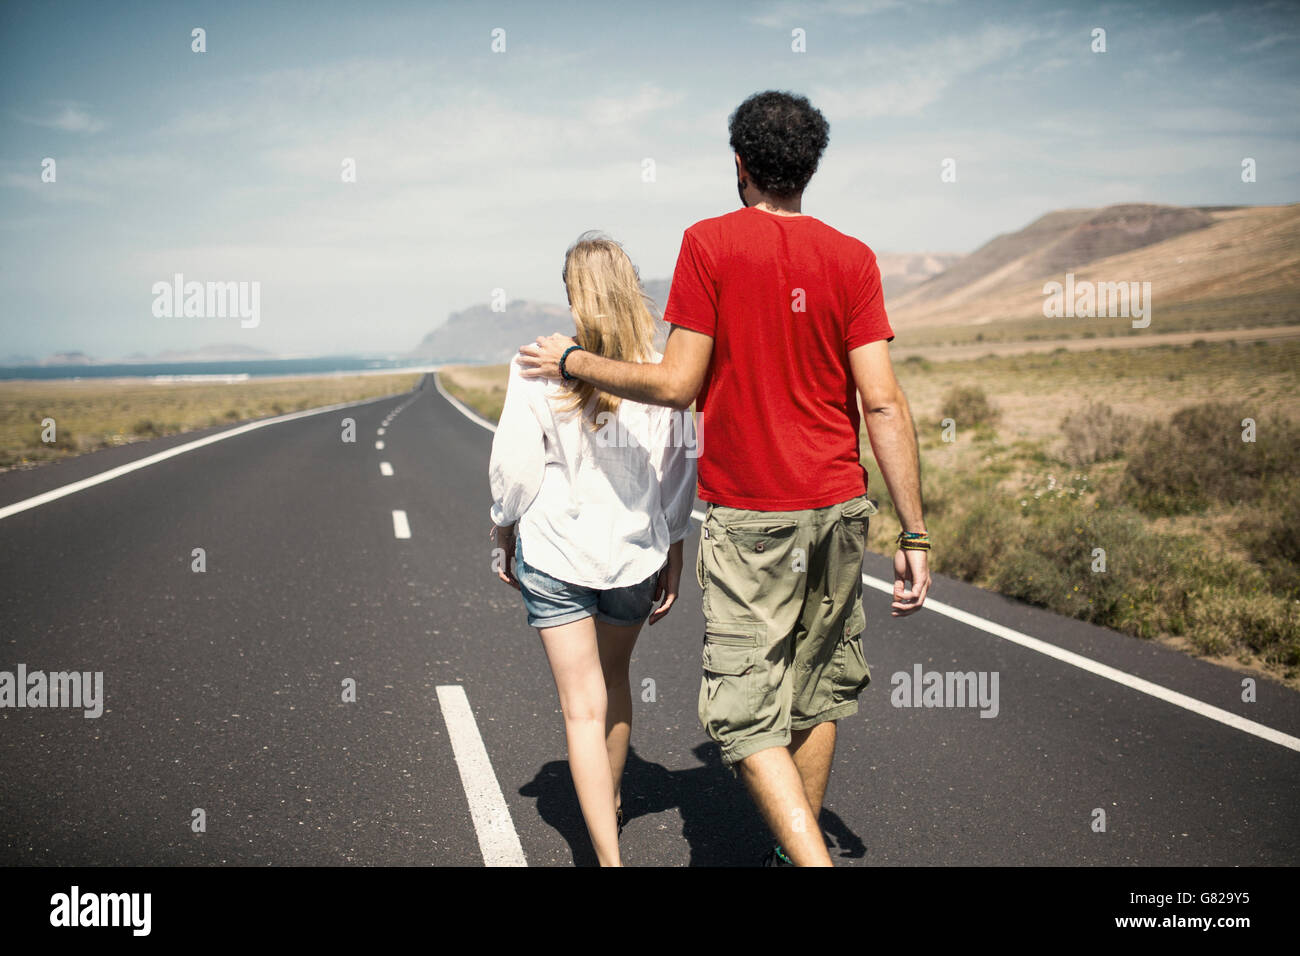 Rear view of couple with arm around walking on road Stock Photo